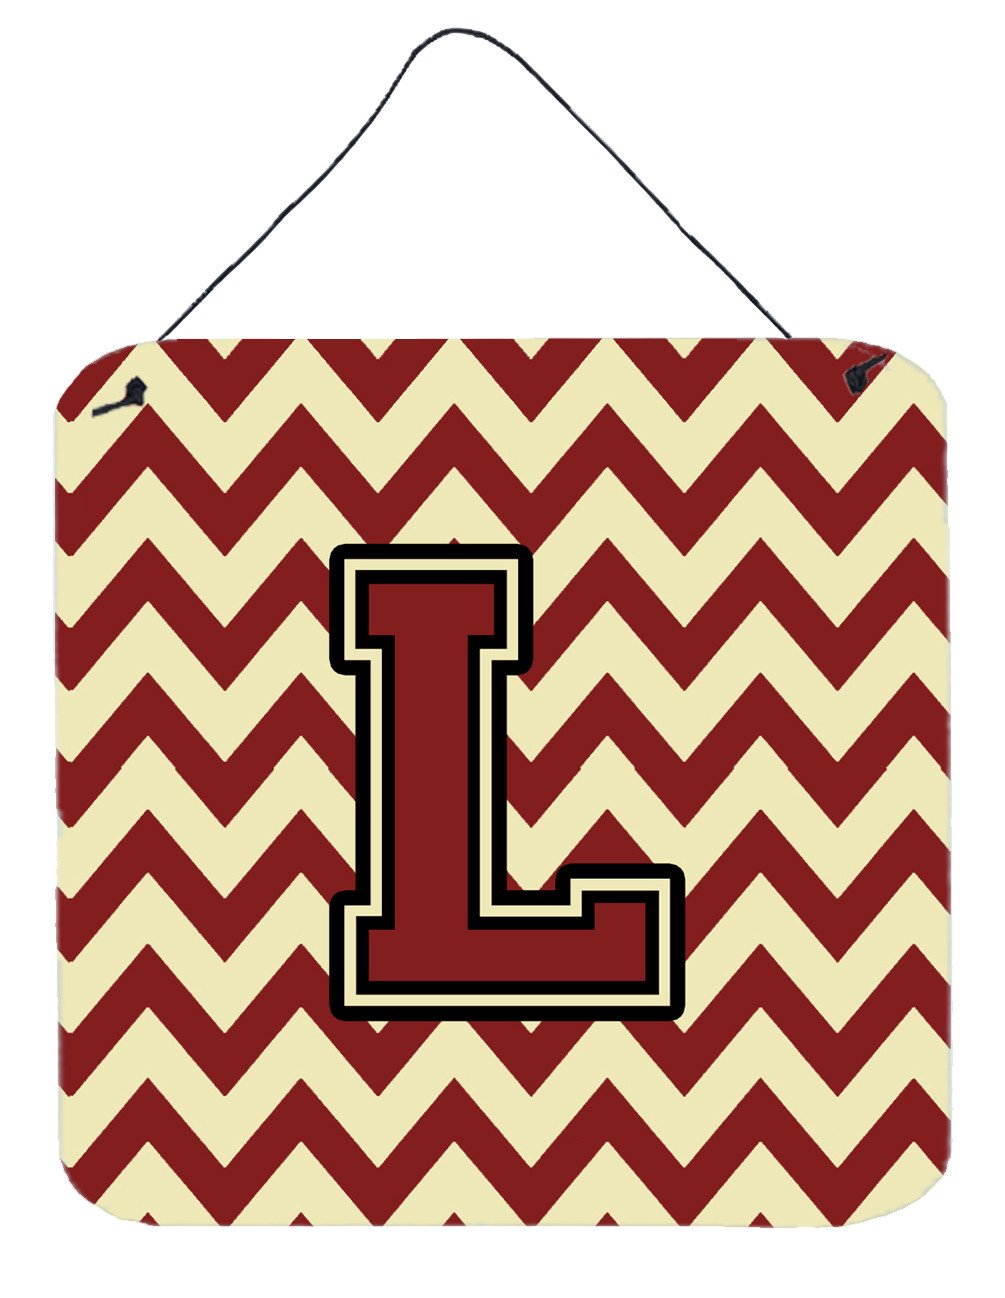 Letter L Chevron Maroon and Gold Wall or Door Hanging Prints CJ1061-LDS66 by Caroline's Treasures